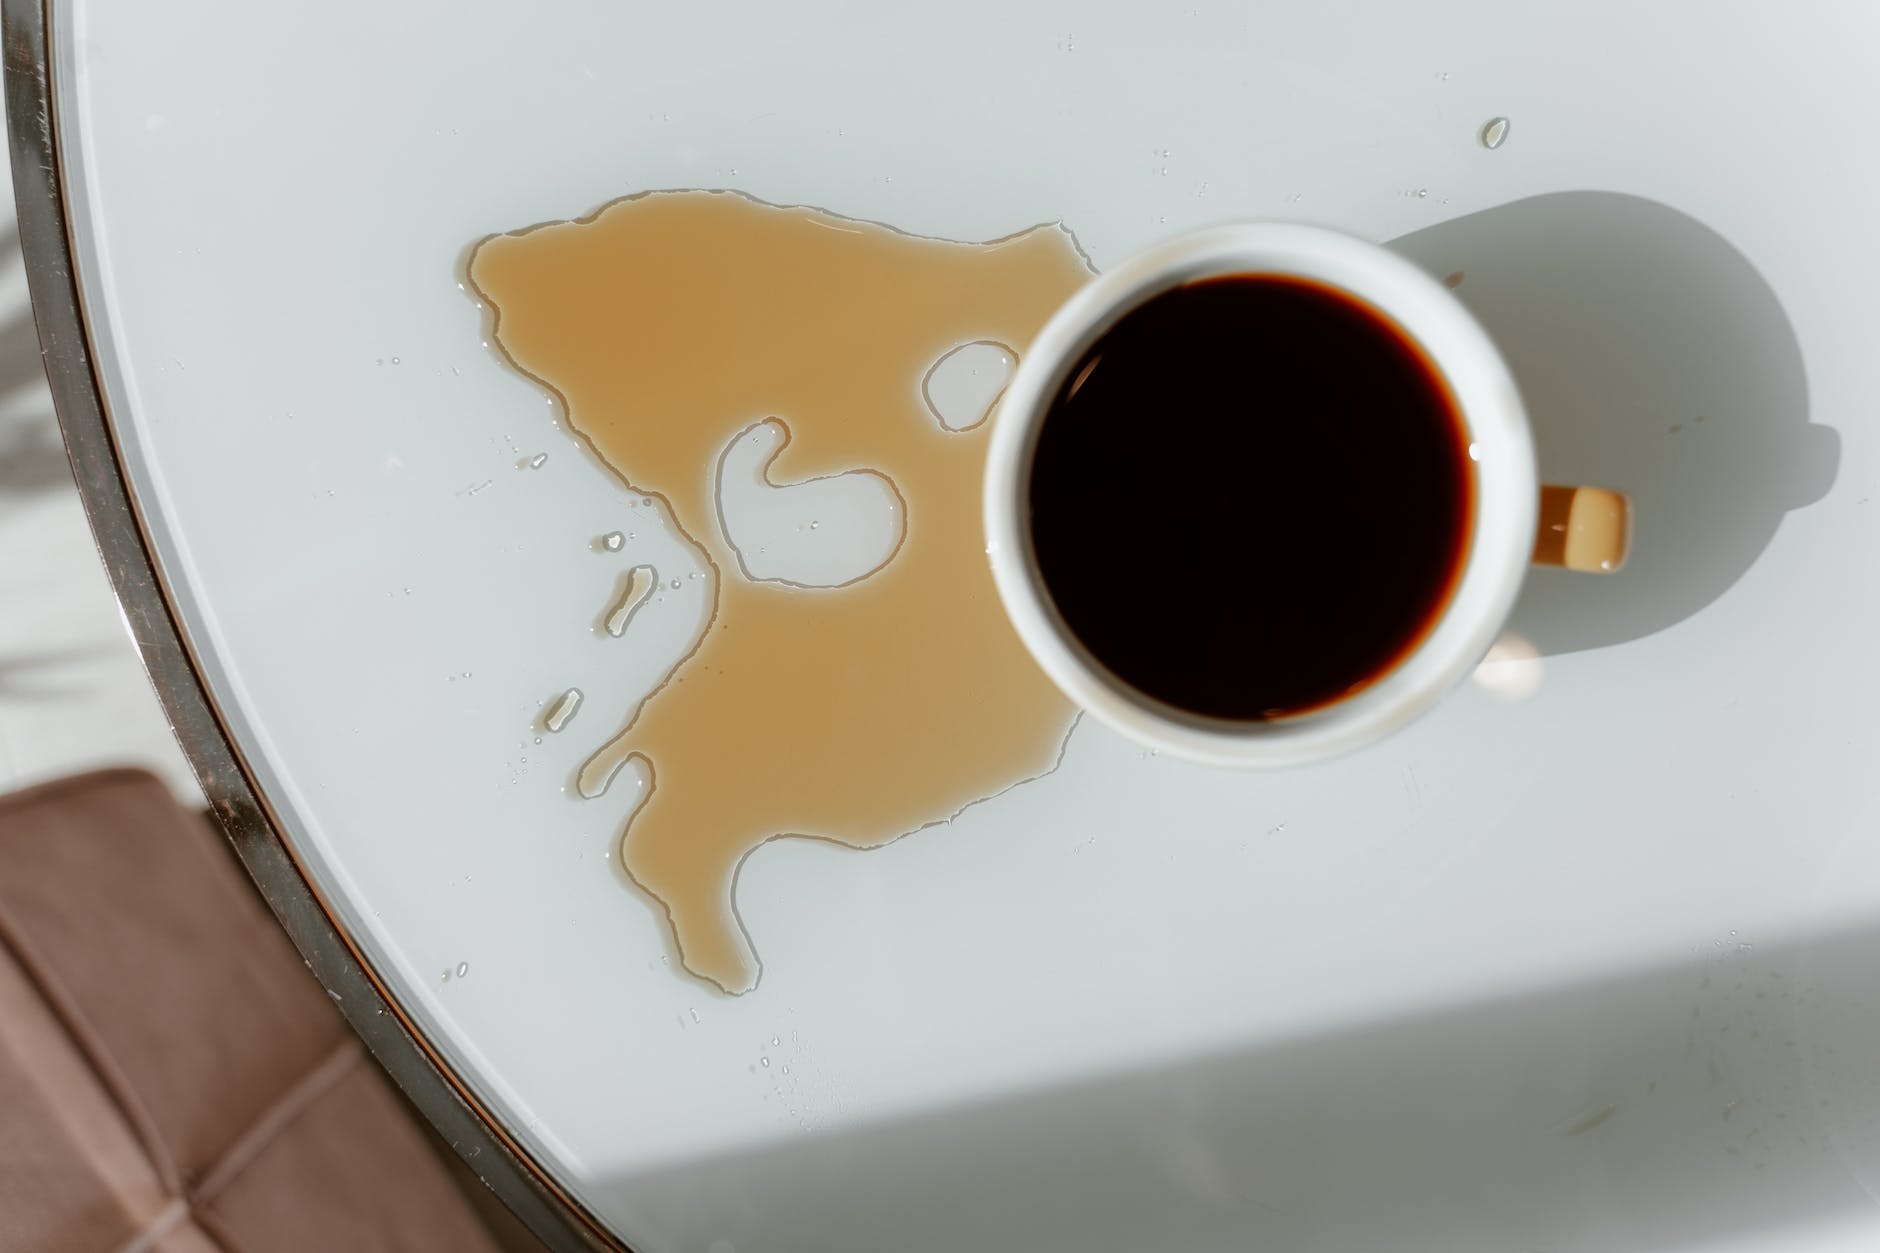 spilled coffee on table